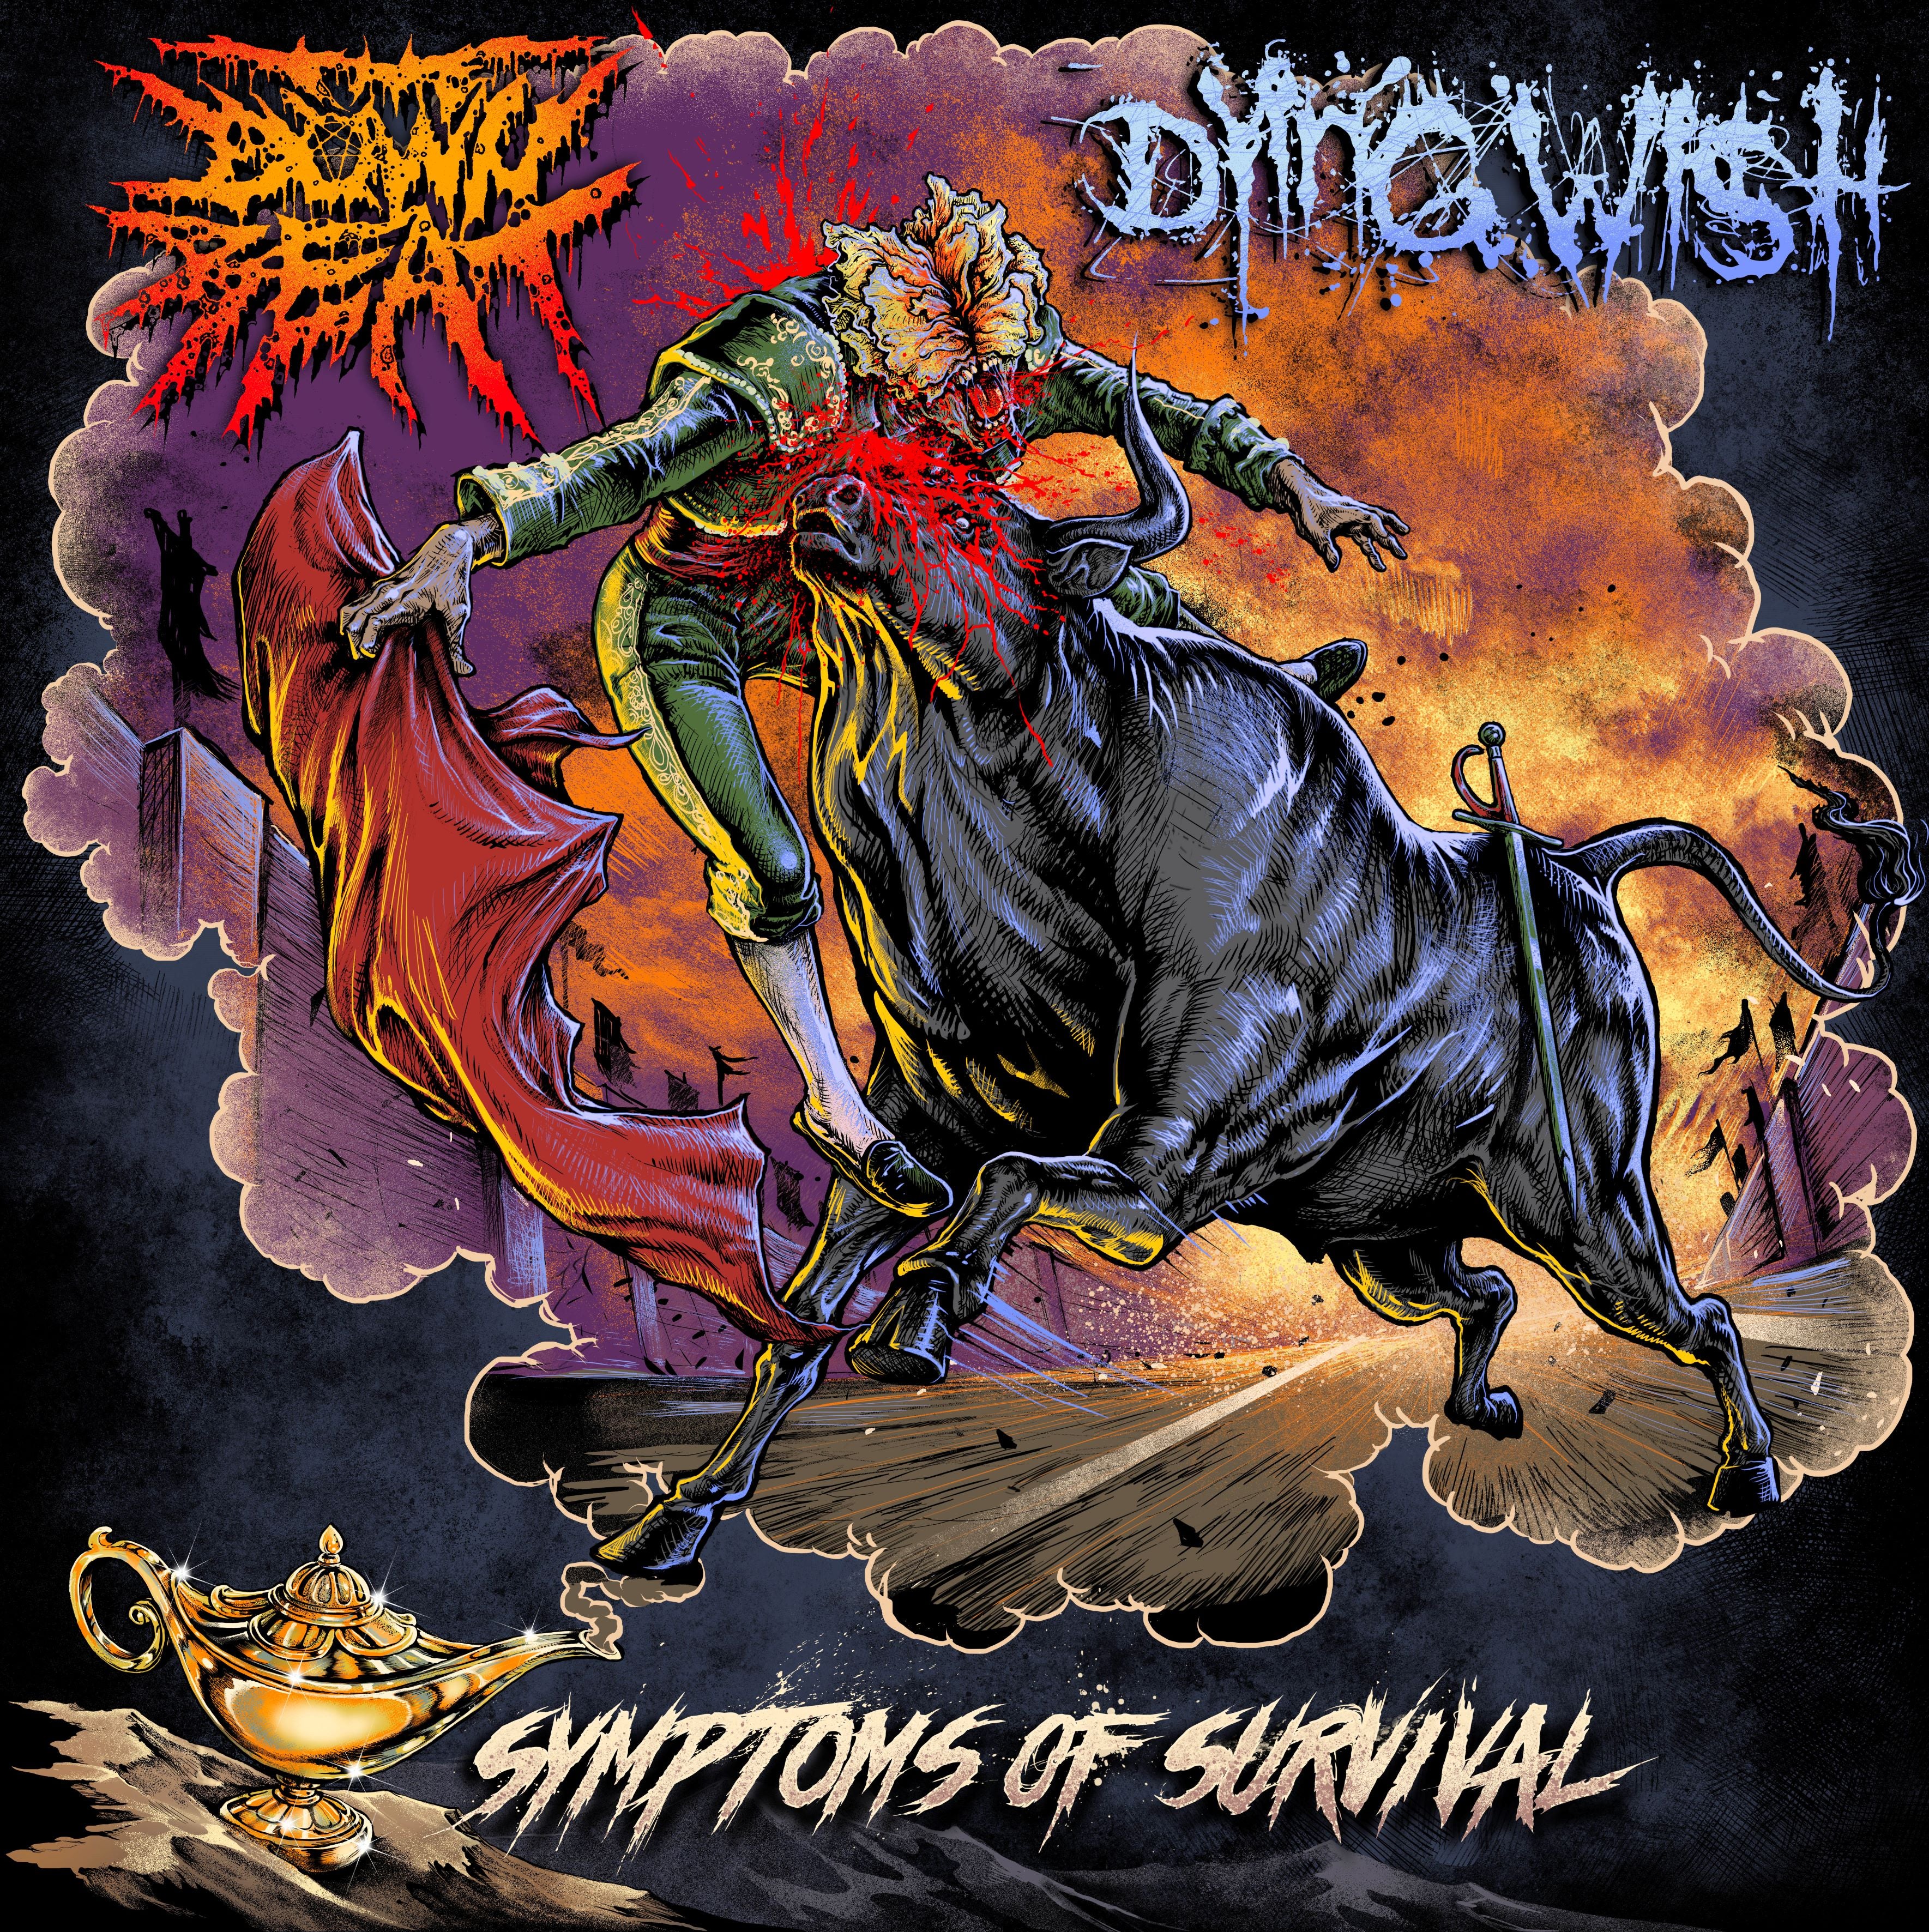 Symptoms of Survival 12" Vinyl - Downbeat X Dying Wish Collab - (Pre-Order Limited to 500 Copies)